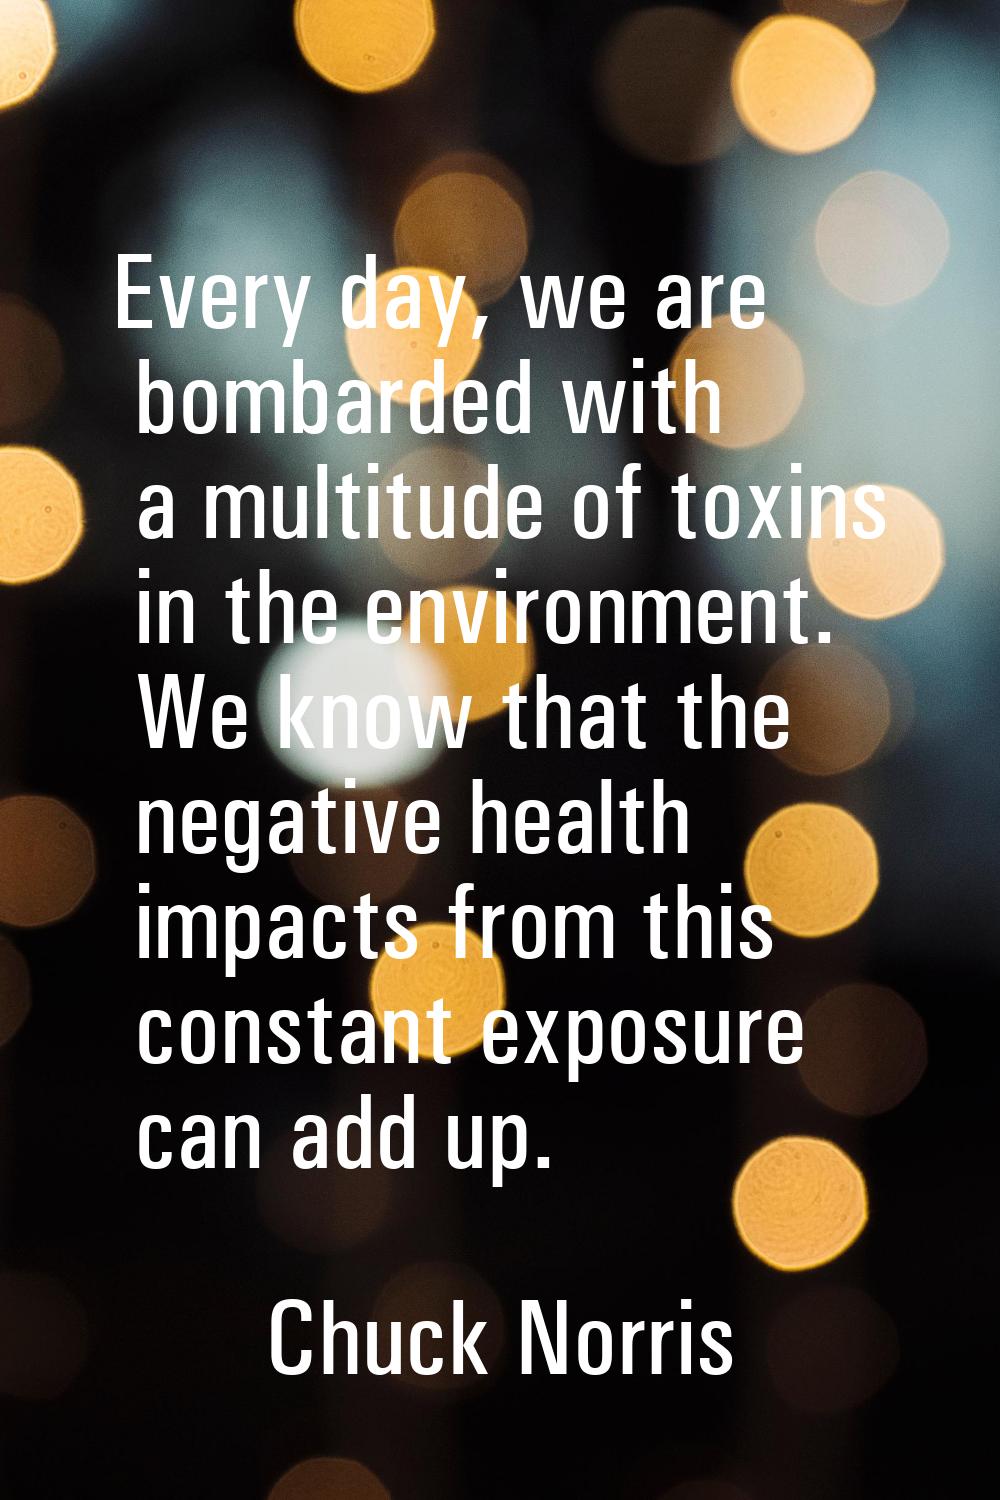 Every day, we are bombarded with a multitude of toxins in the environment. We know that the negativ